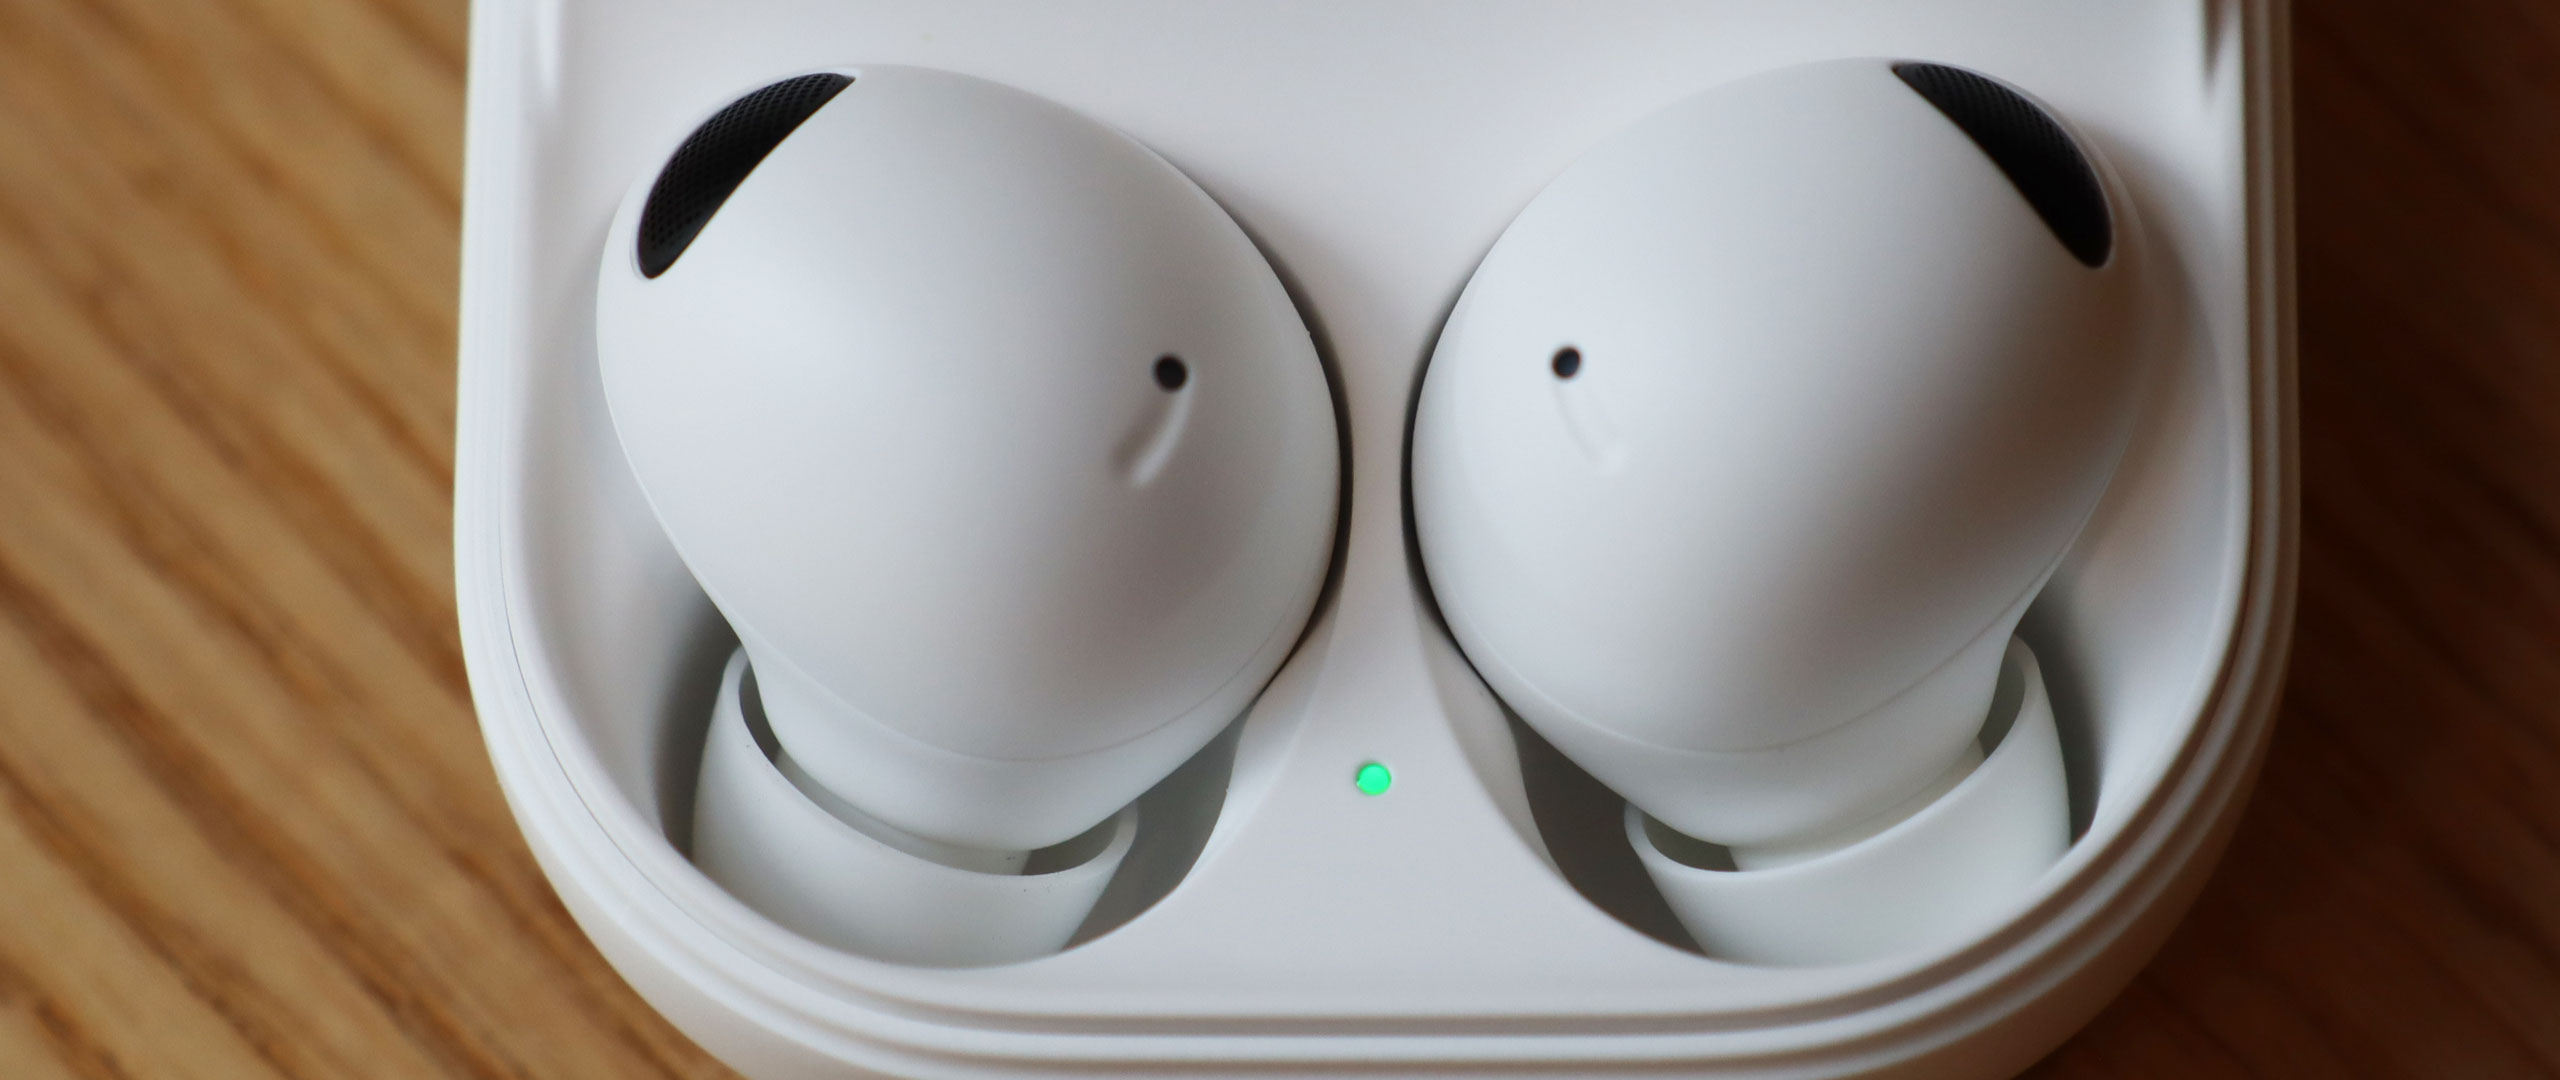 Galaxy Buds 2 Pro review: Samsung's excellent answer to AirPods Pro